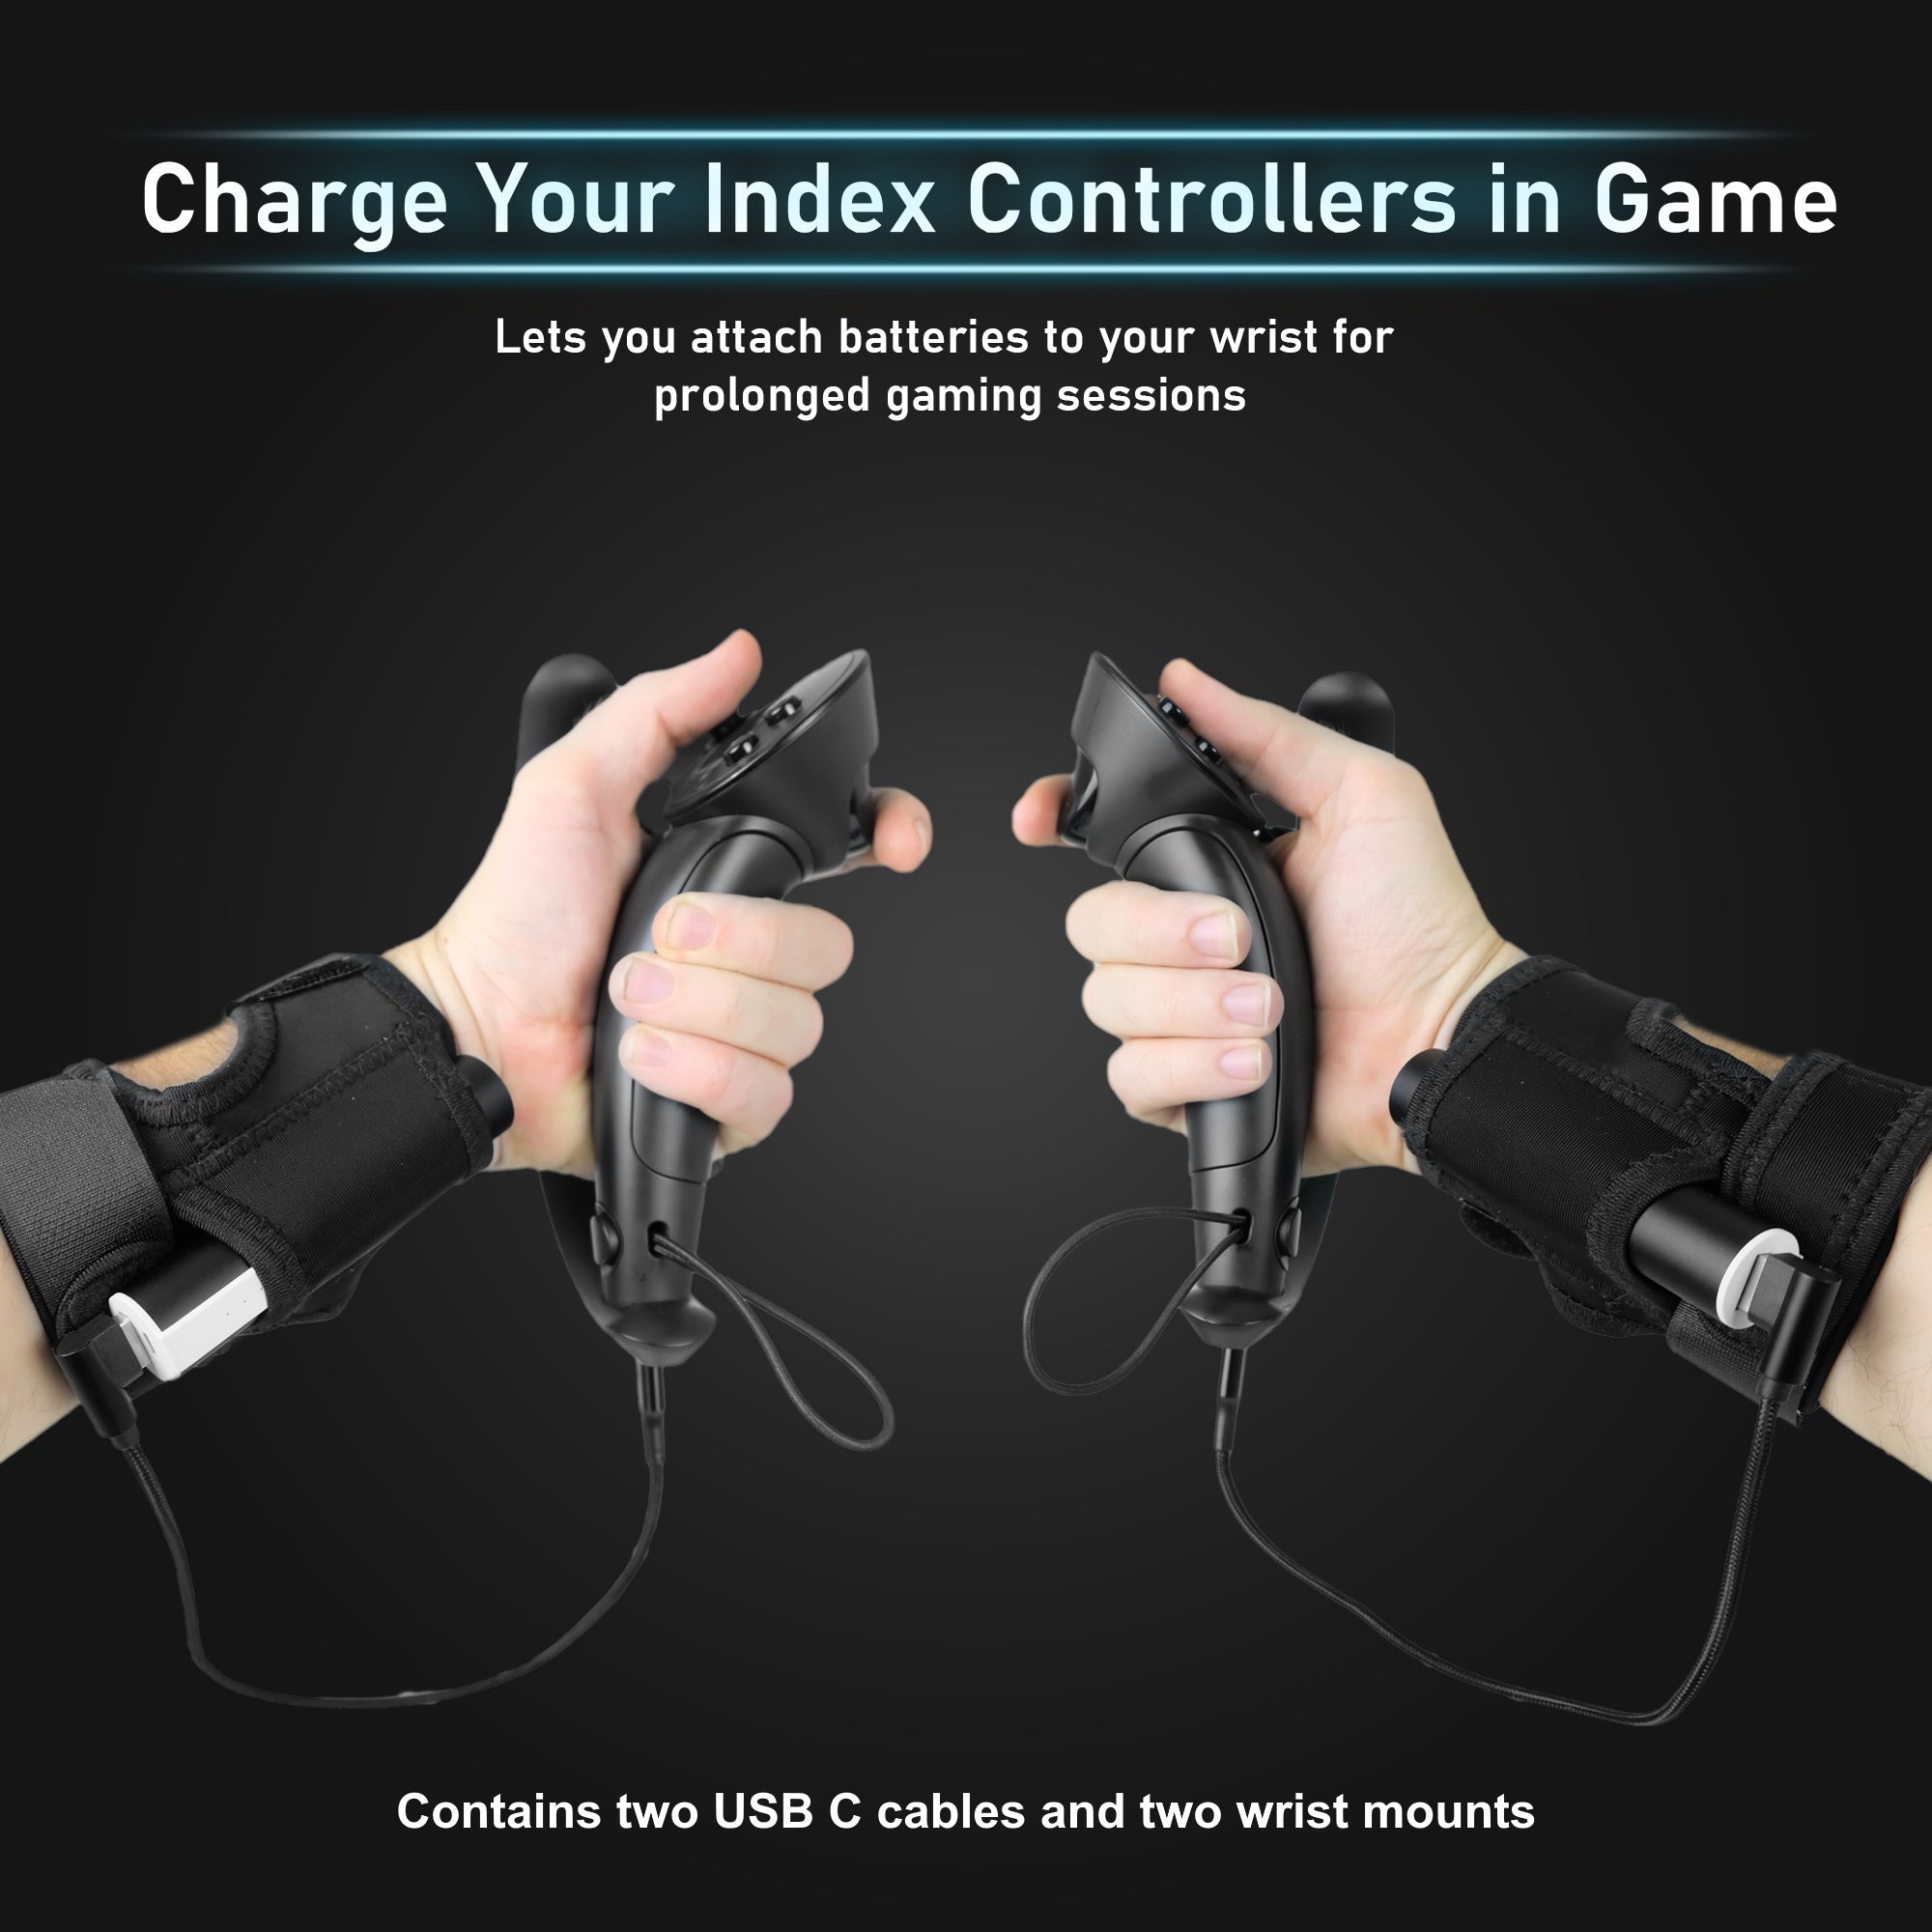 Valve Index Wrist Mounted Battery Kit - Accessory That Charges Your Controllers While Playing